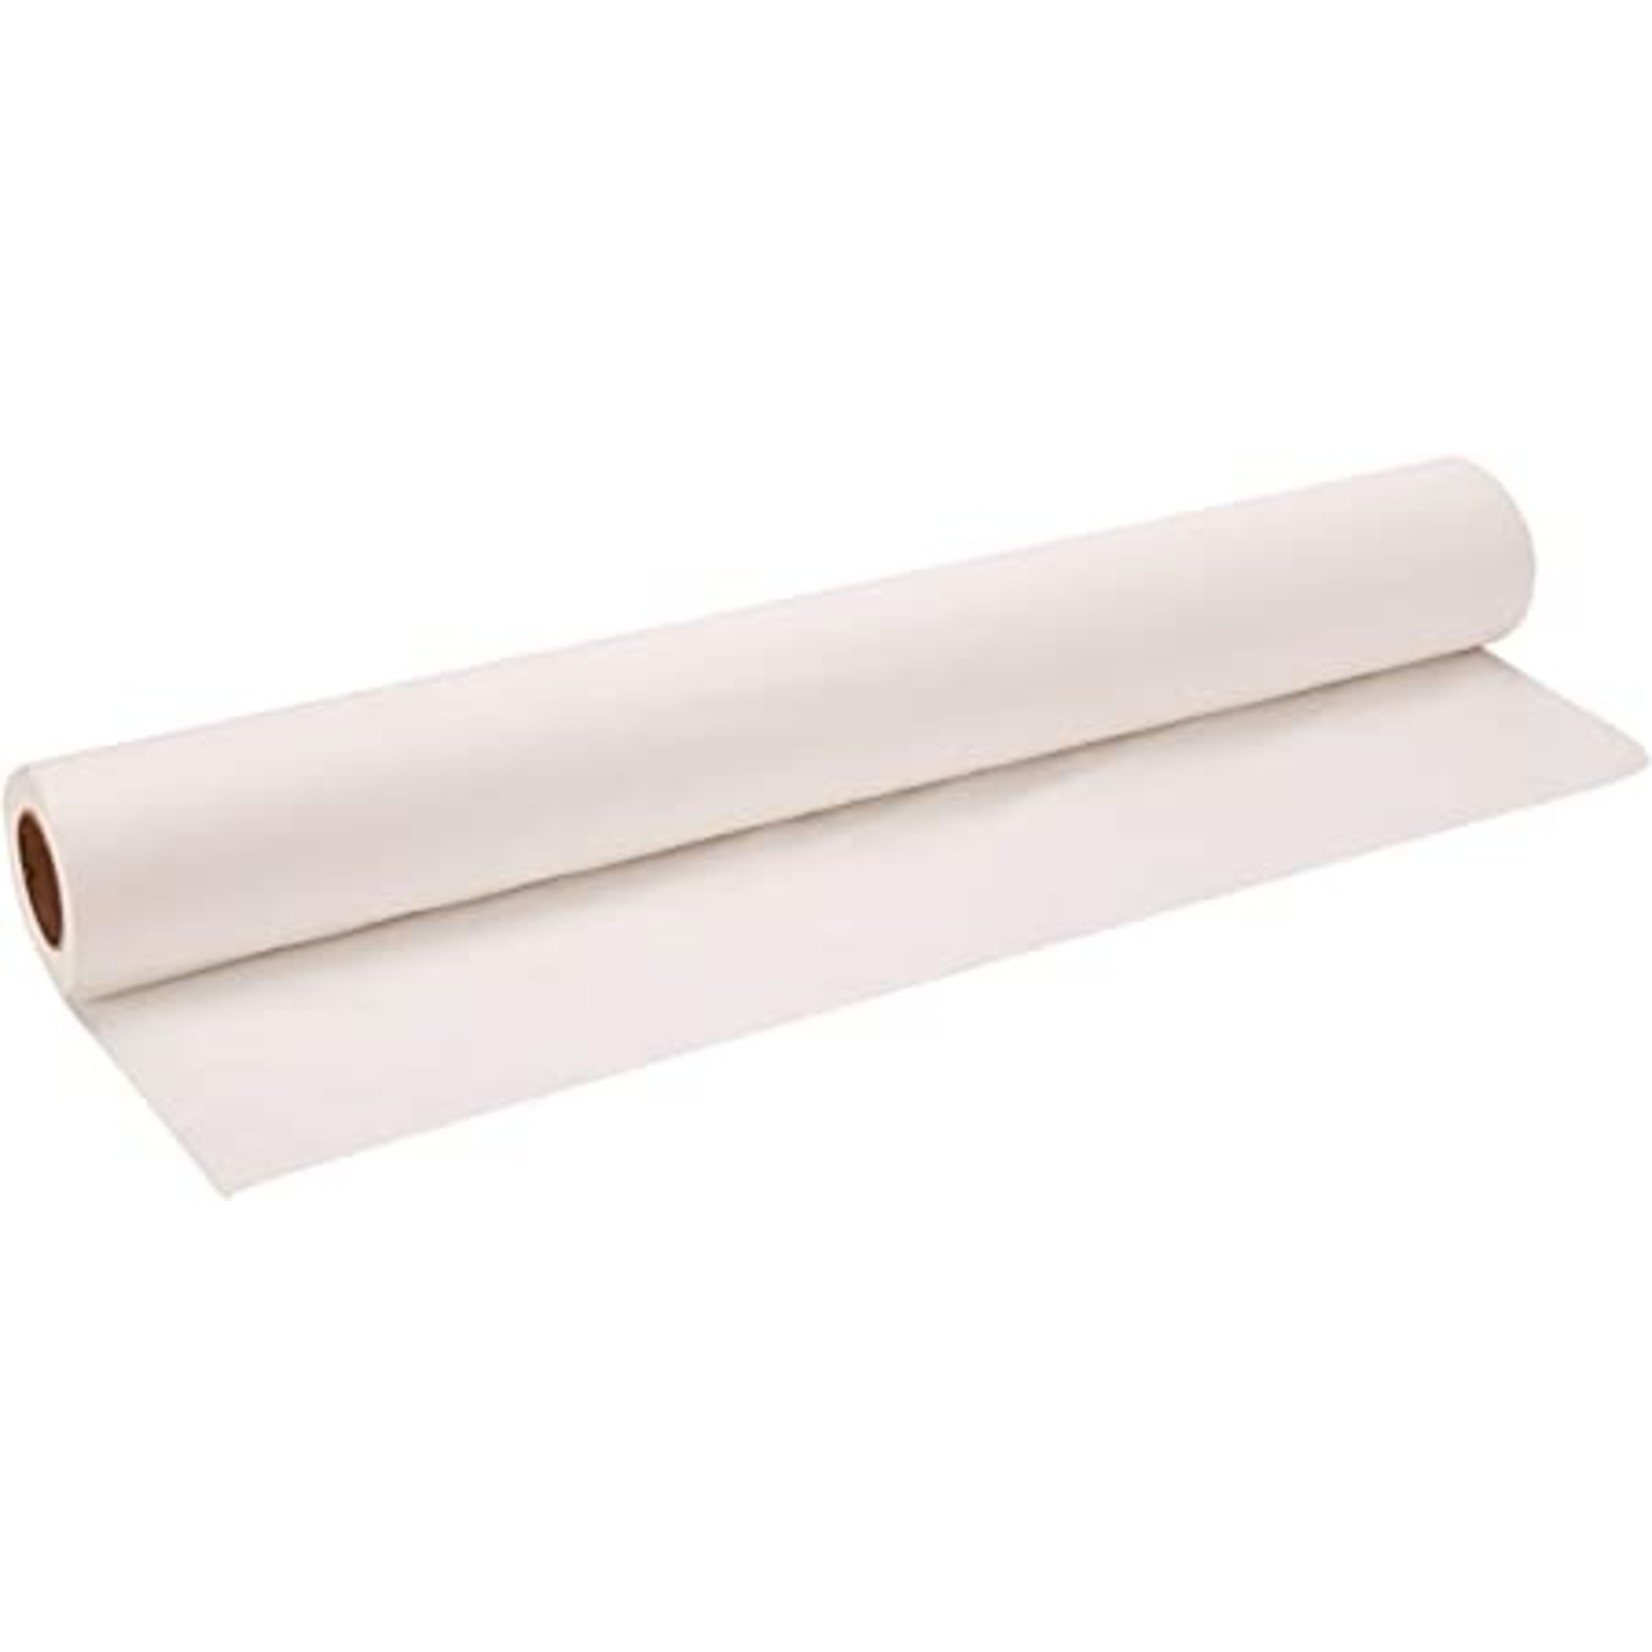 Roll of Tracing Paper 225 Feet